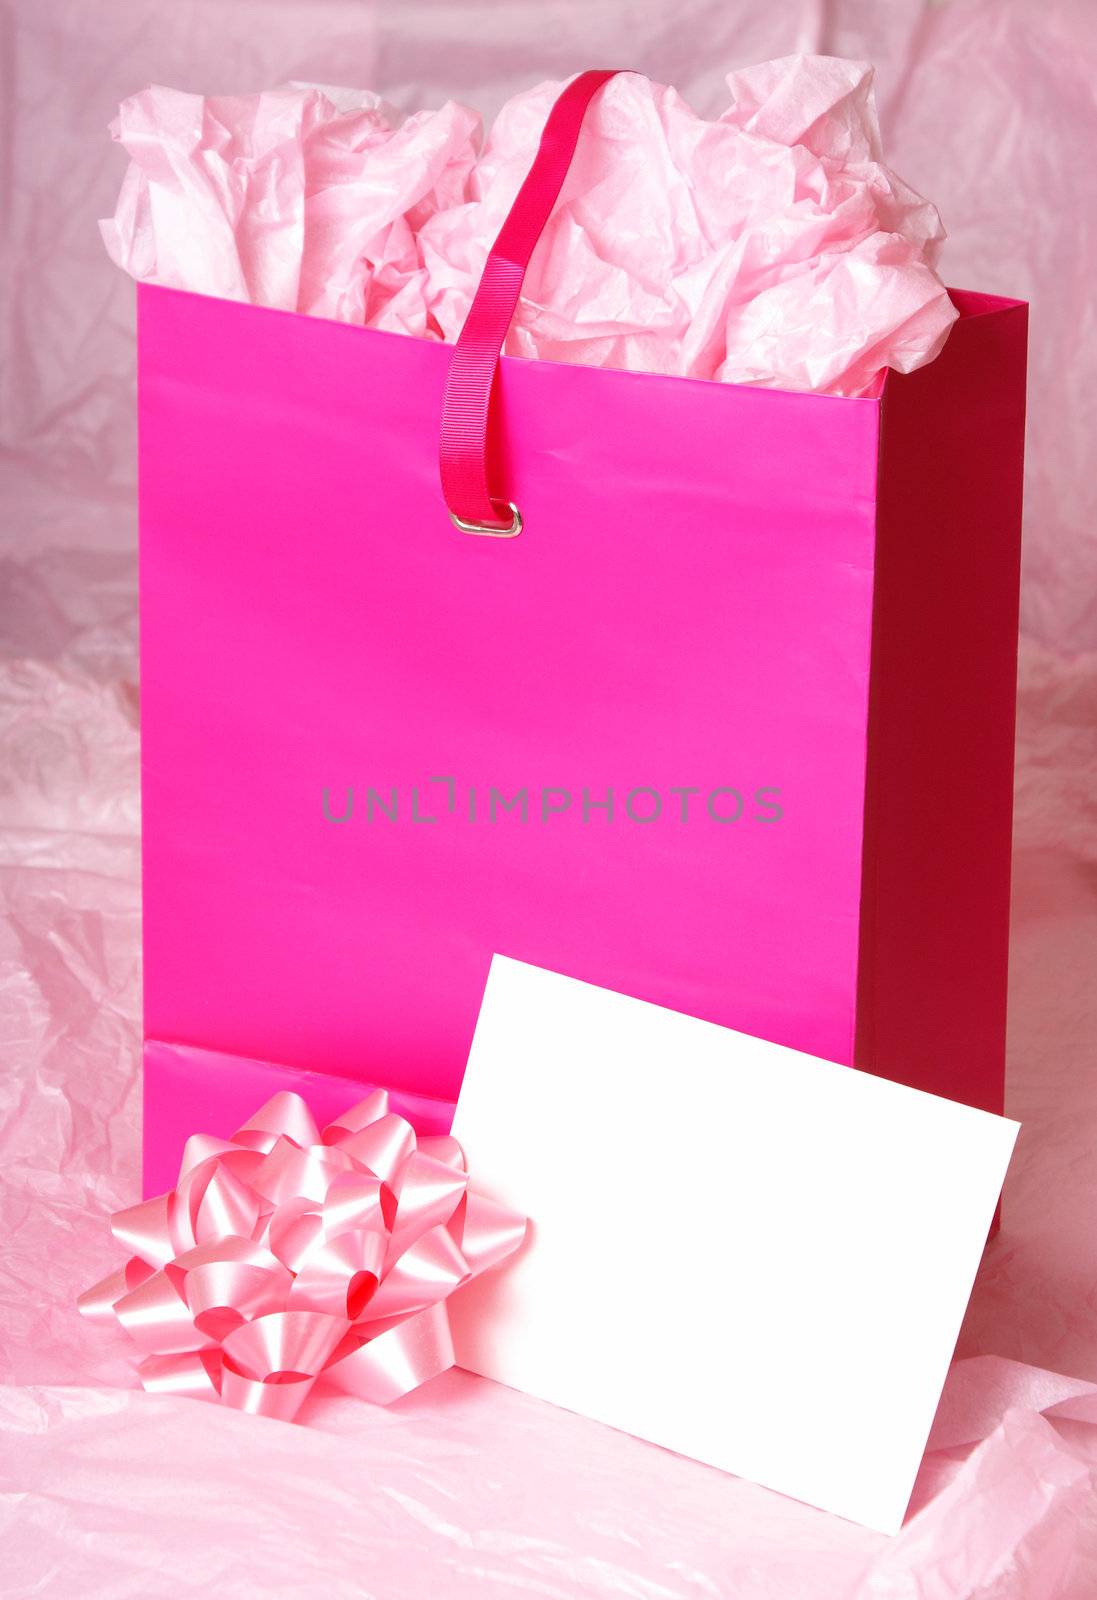 A nice present all in pink with a card left blank for your own copyspace.